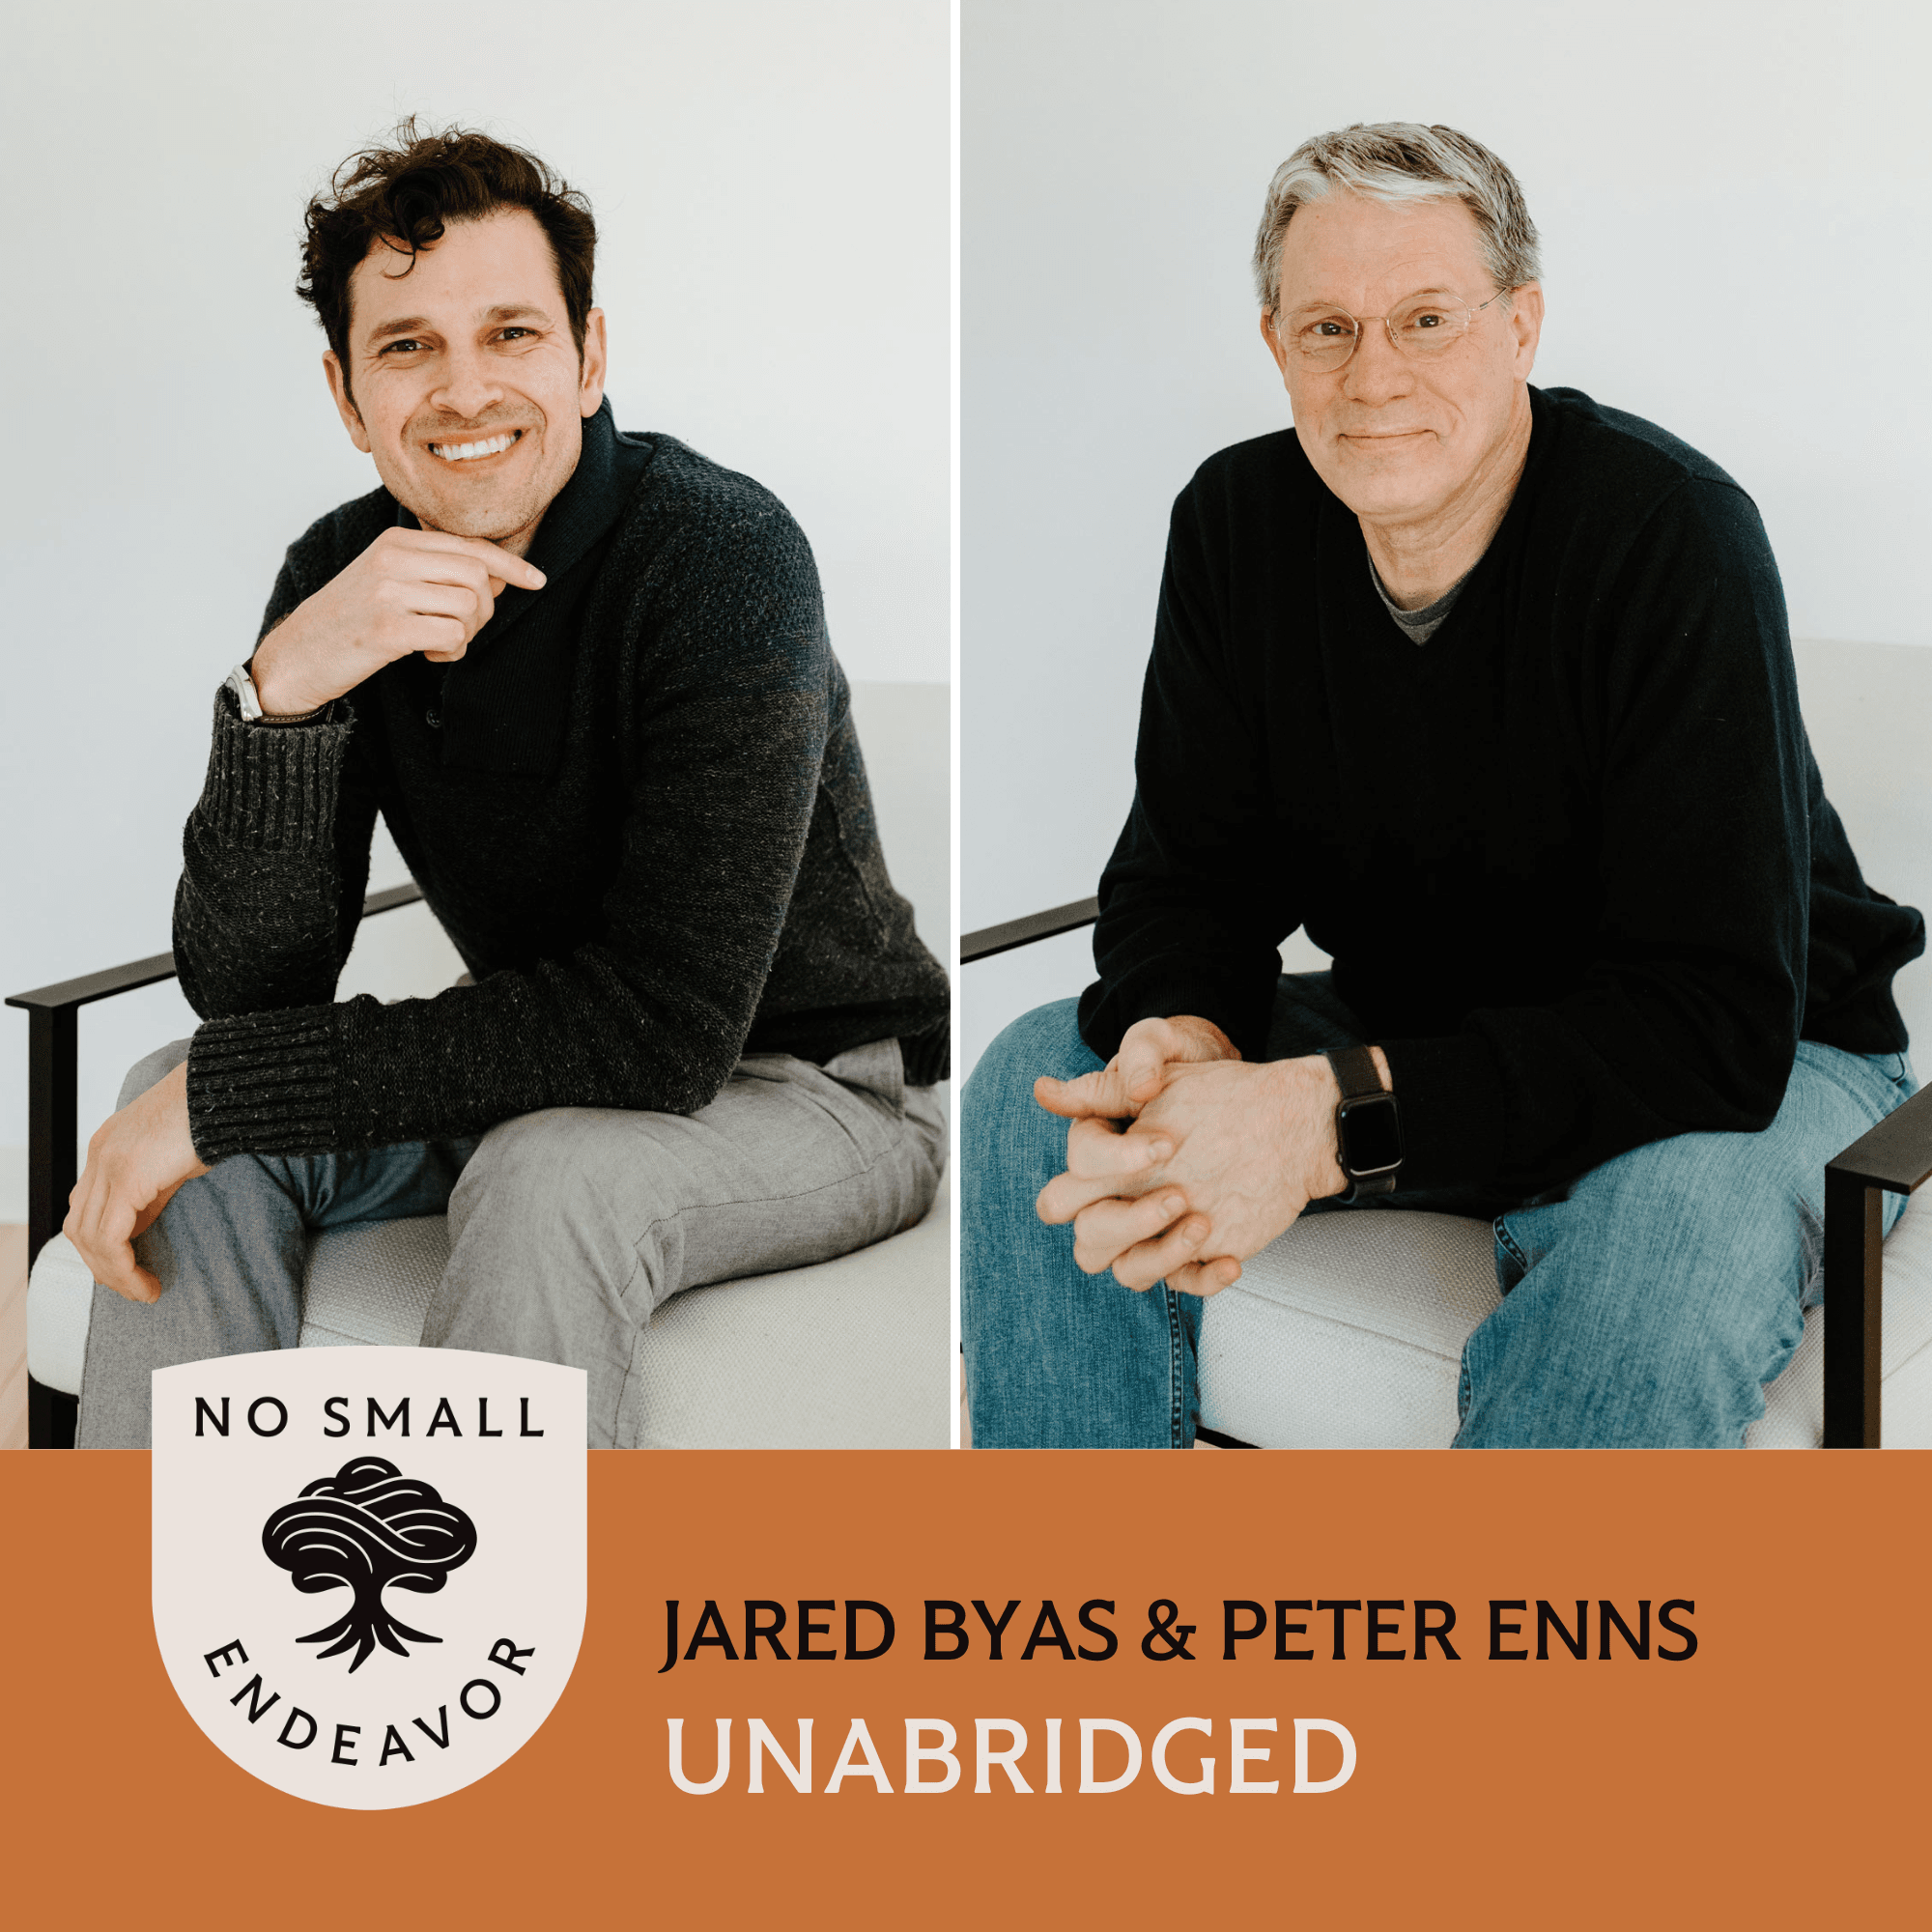 Thumbnail for "165: Unabridged Interview: Peter Enns and Jared Byas".